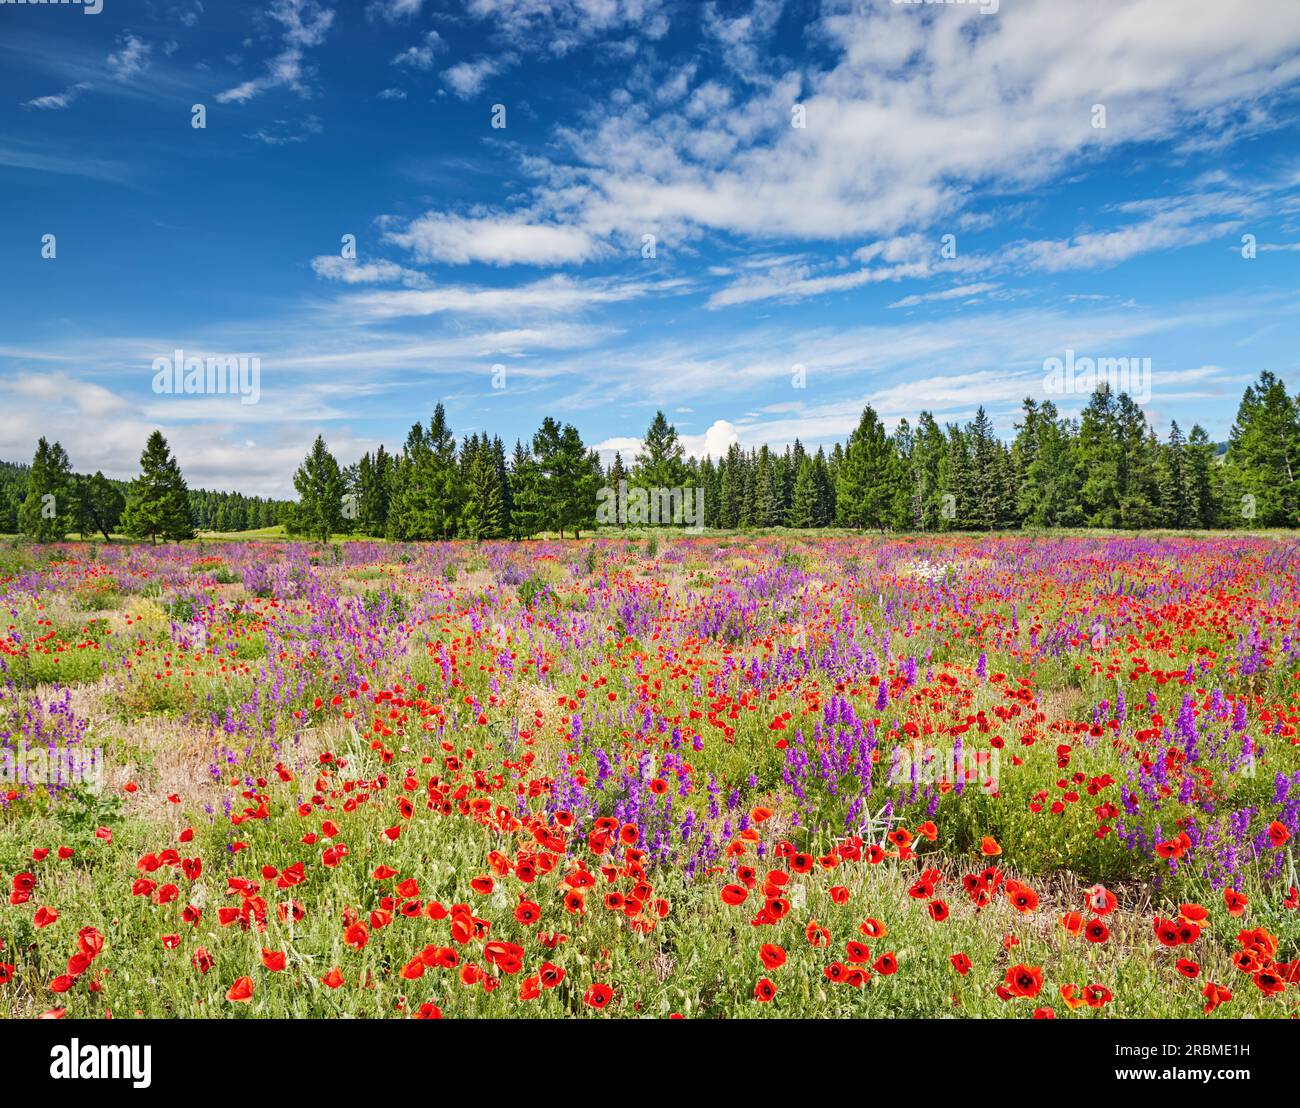 Landscape with forest and blossoming field with wildflowers Stock Photo